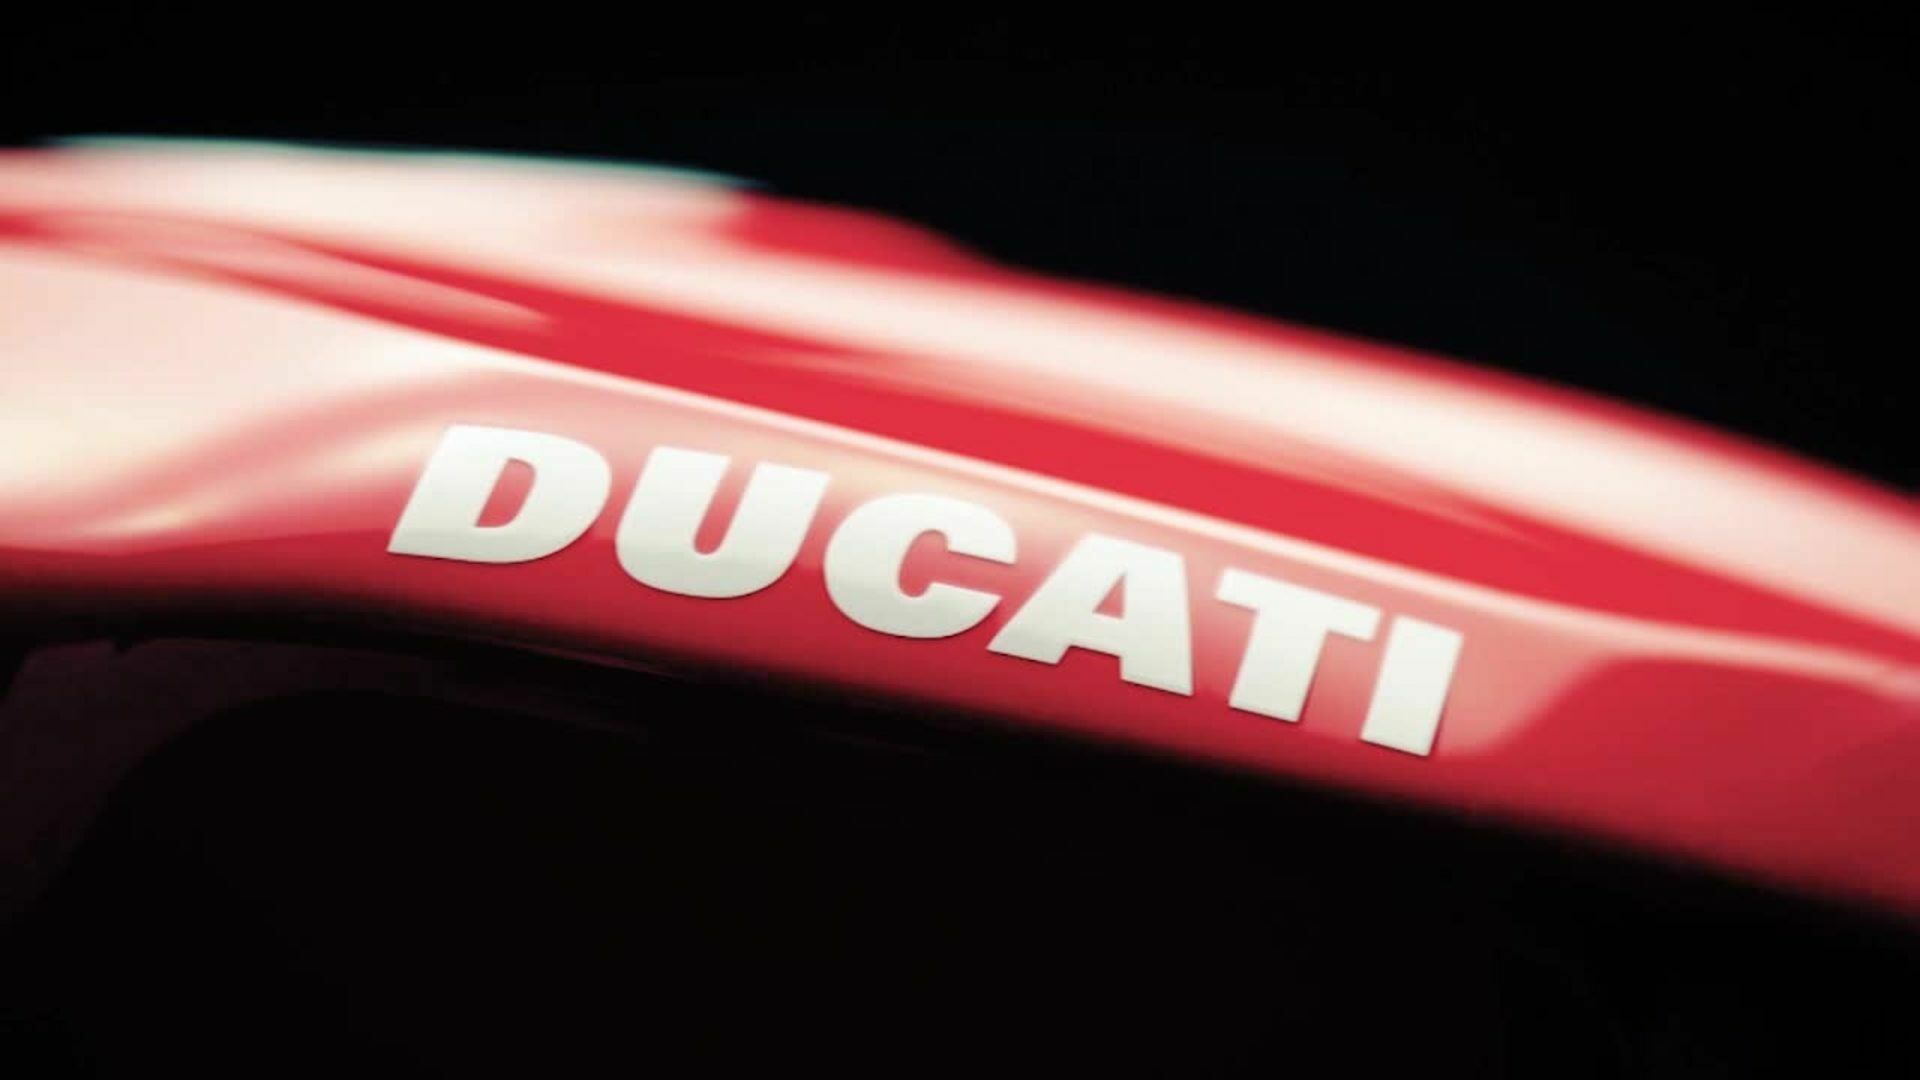 A visit at the Ducati Design Center